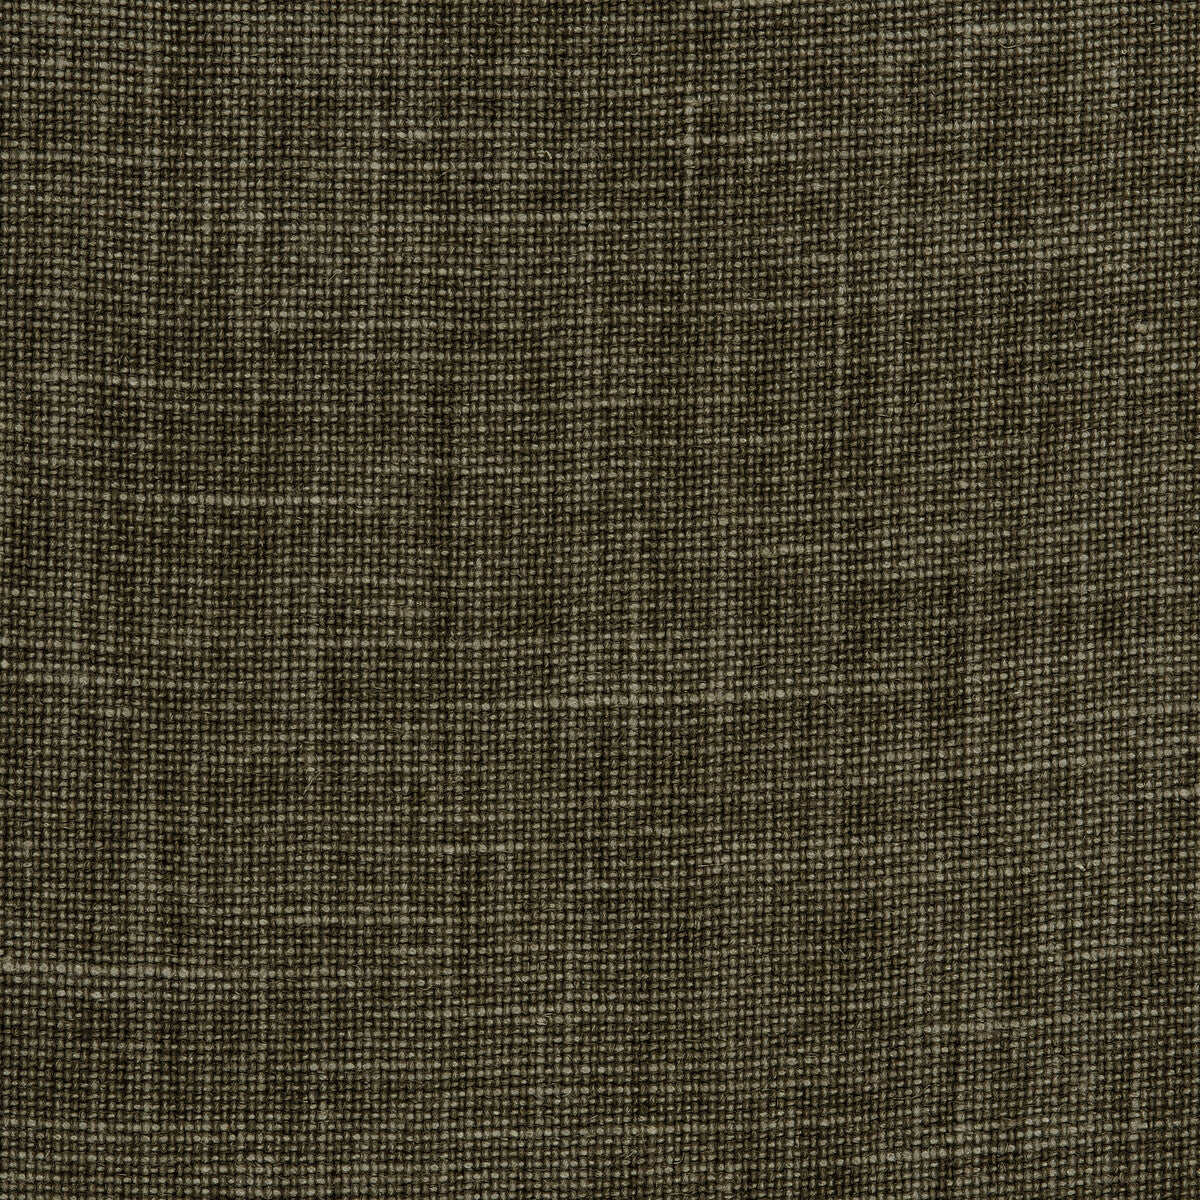 Kravet Basics fabric in 33767-66 color - pattern 33767.66.0 - by Kravet Basics in the Perfect Plains collection